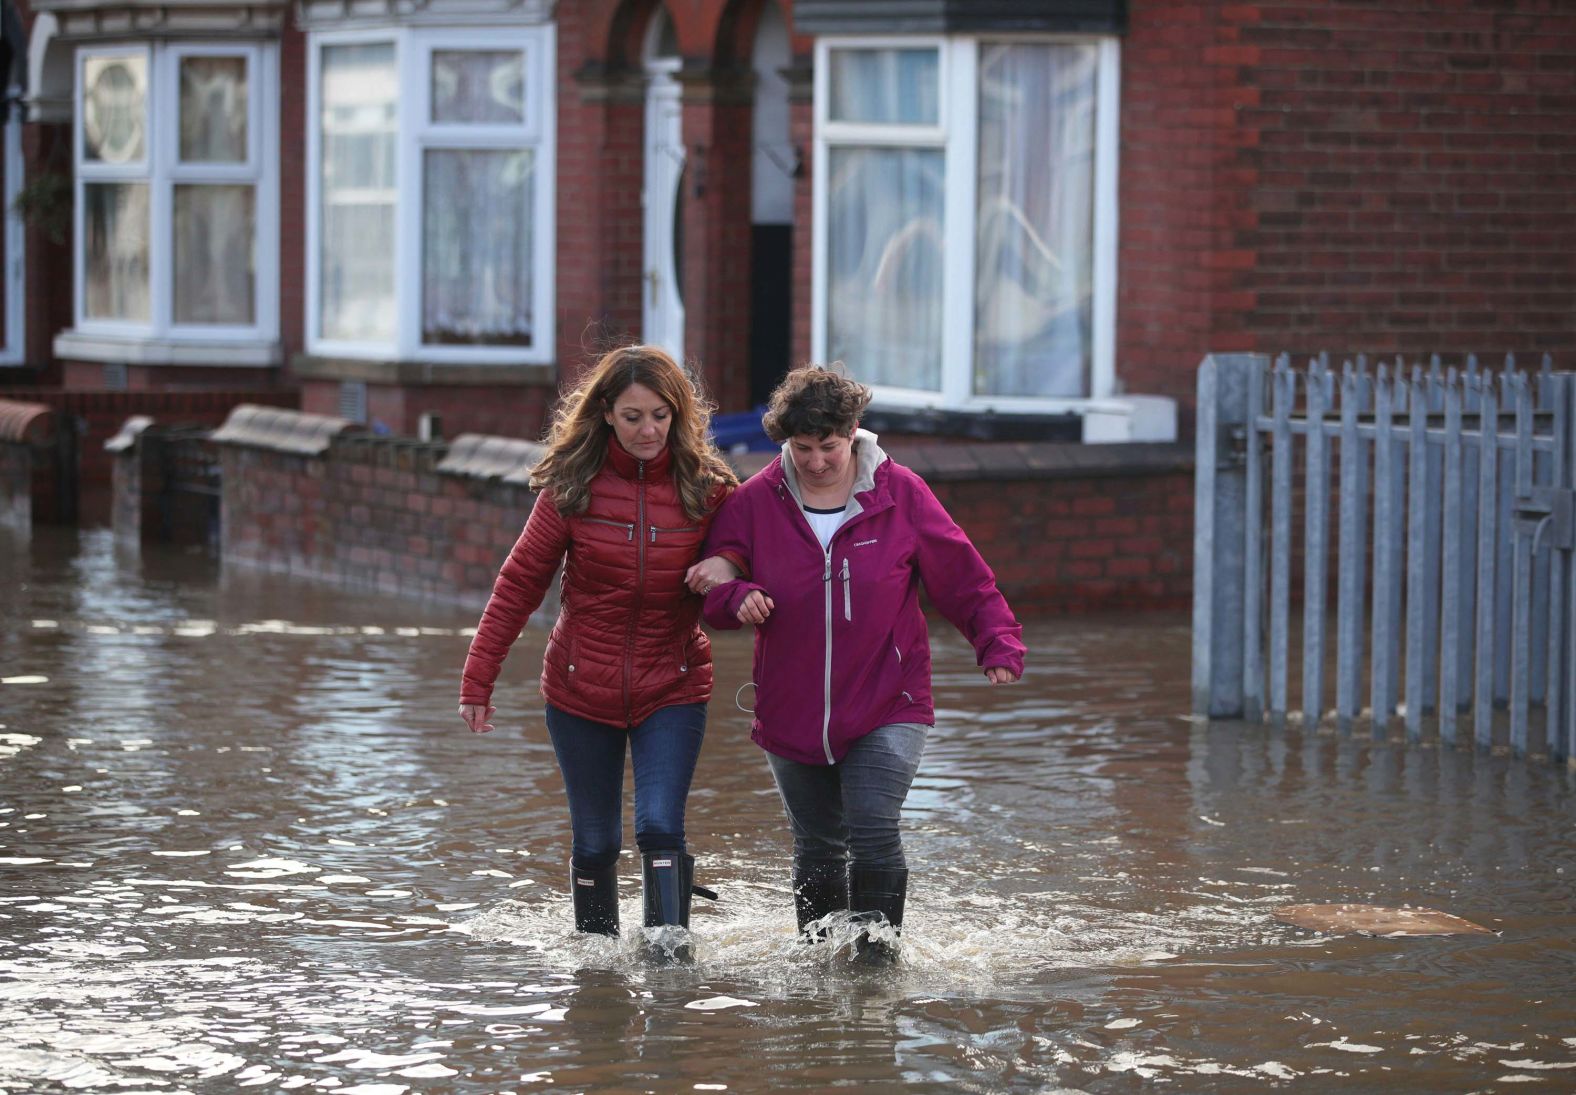 People walk through floodwater on a residential street in Doncaster.